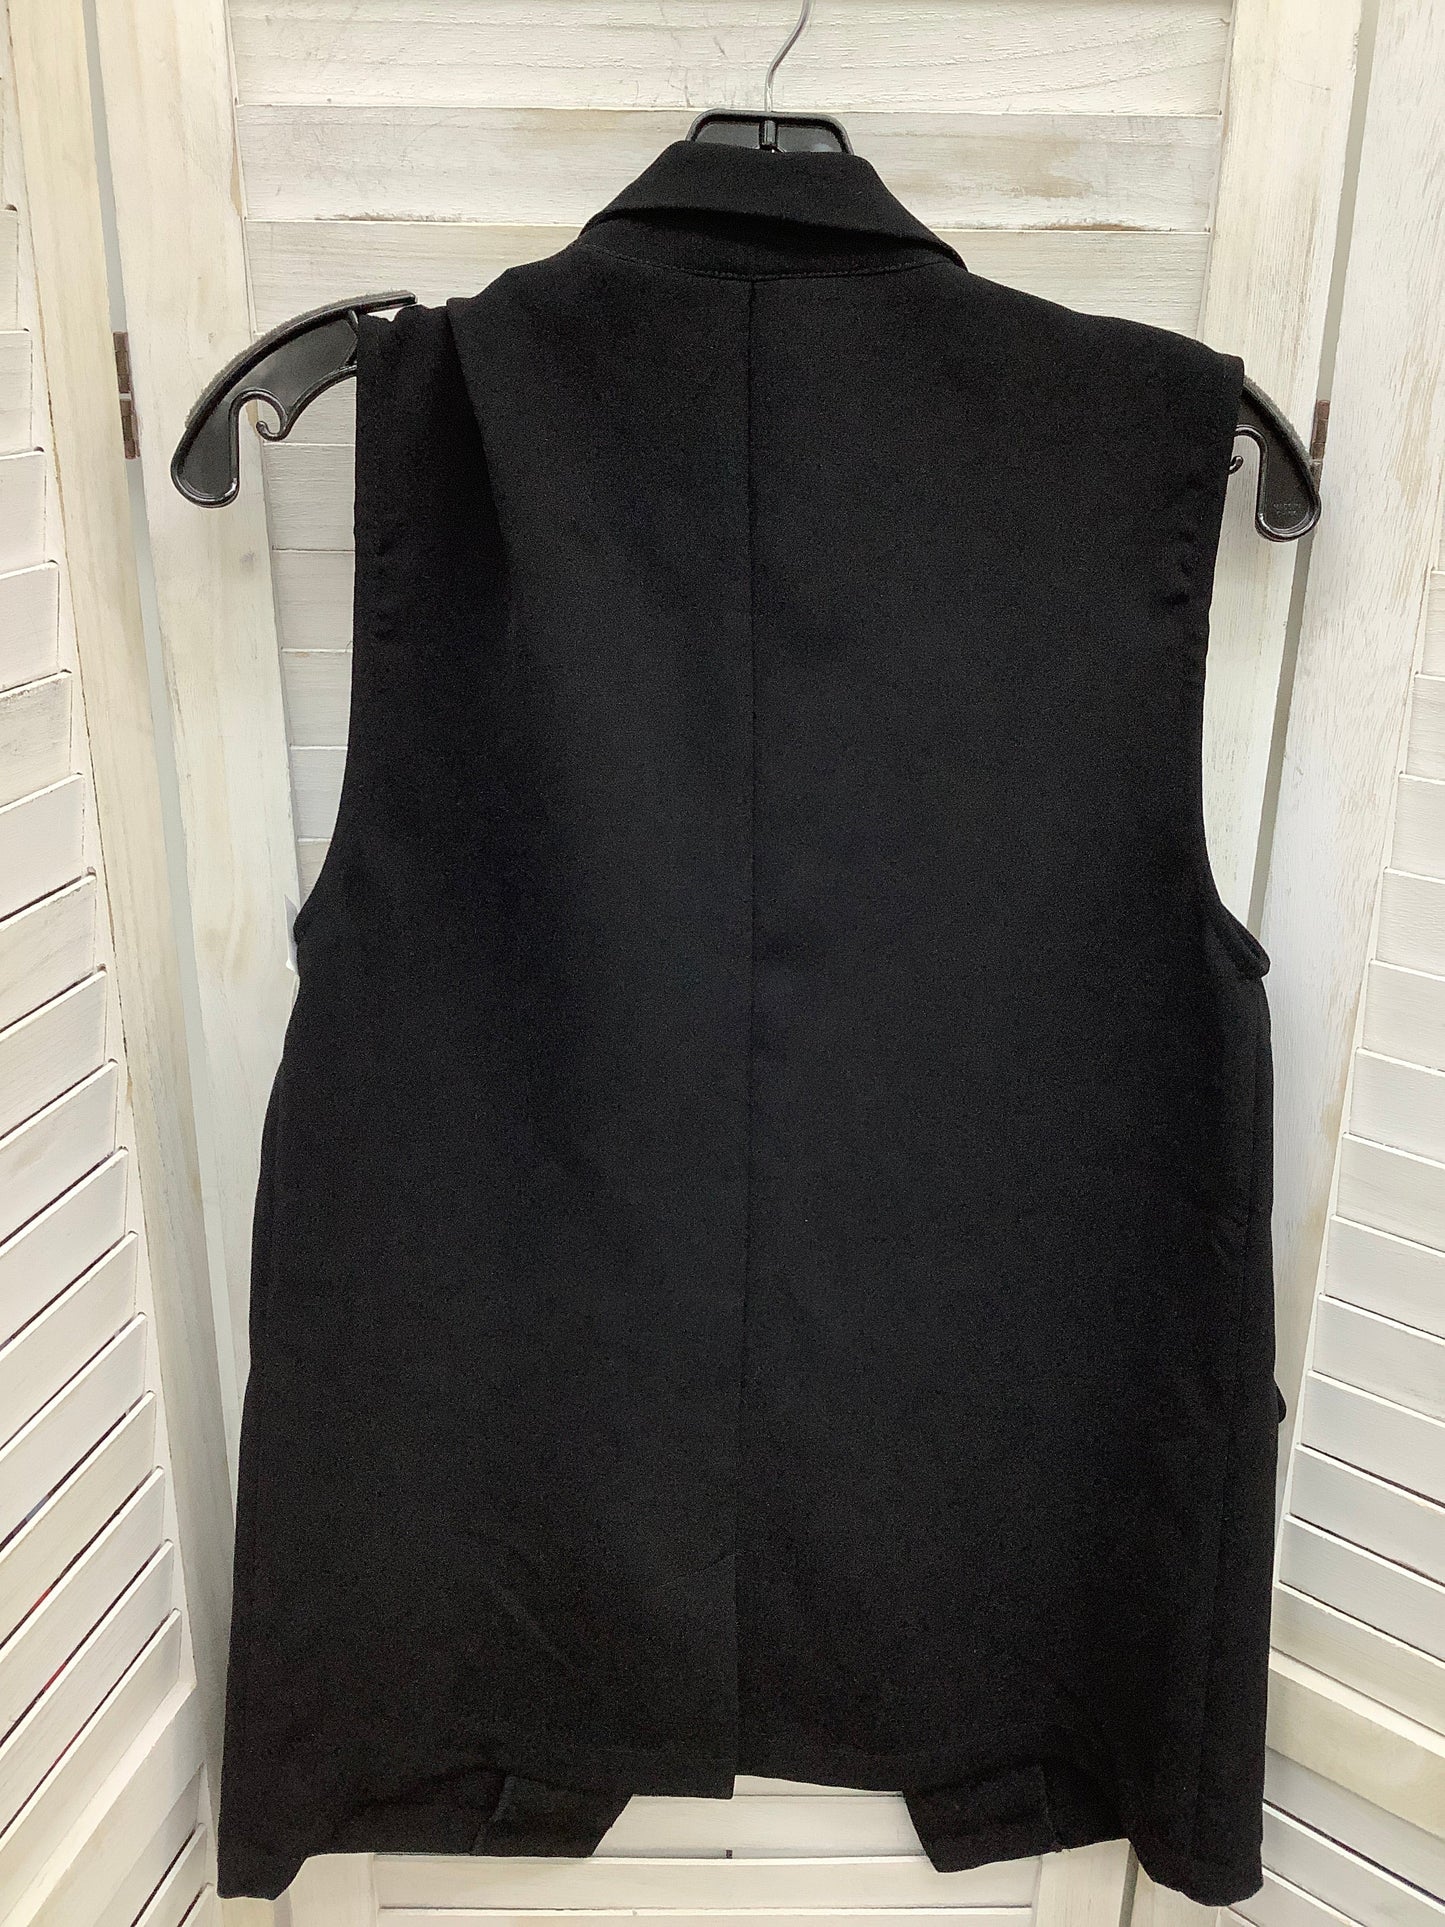 Vest Other By Justfab  Size: S